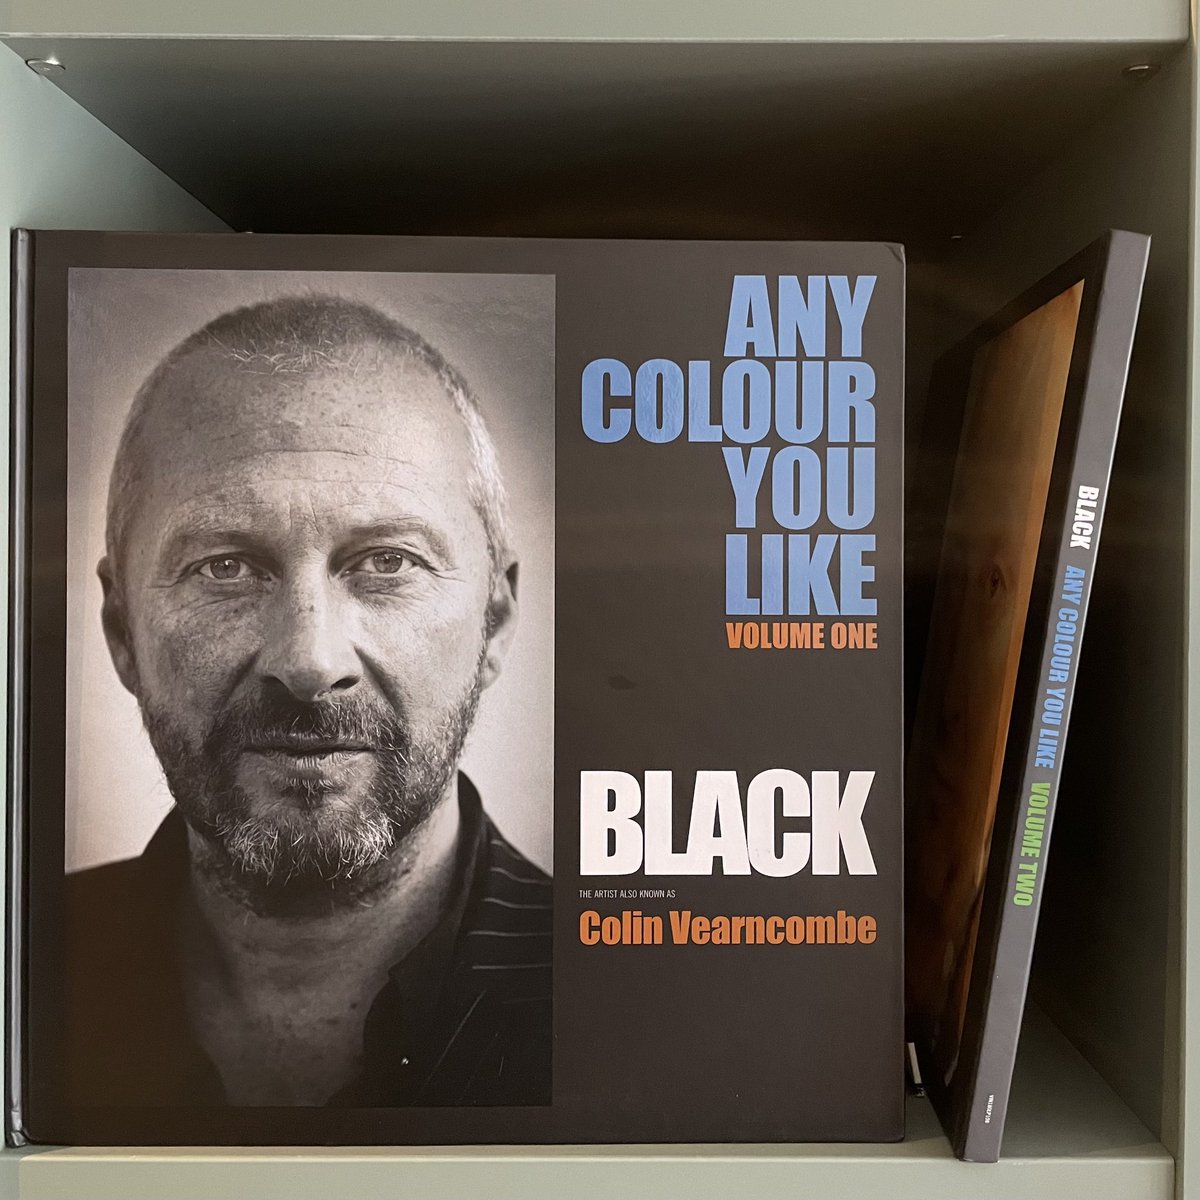 #Top15FaveAlbums #Vinyl

Day 🔟

If you enjoy Colin Vearncombe’s music then this sumptuous hardback retrospective is a beautiful addition to any collection.

And as if the item wasn’t special enough, there’s a second volume 🥹

Track: Wonderful Life

songwhip.com/black9/wonderf…